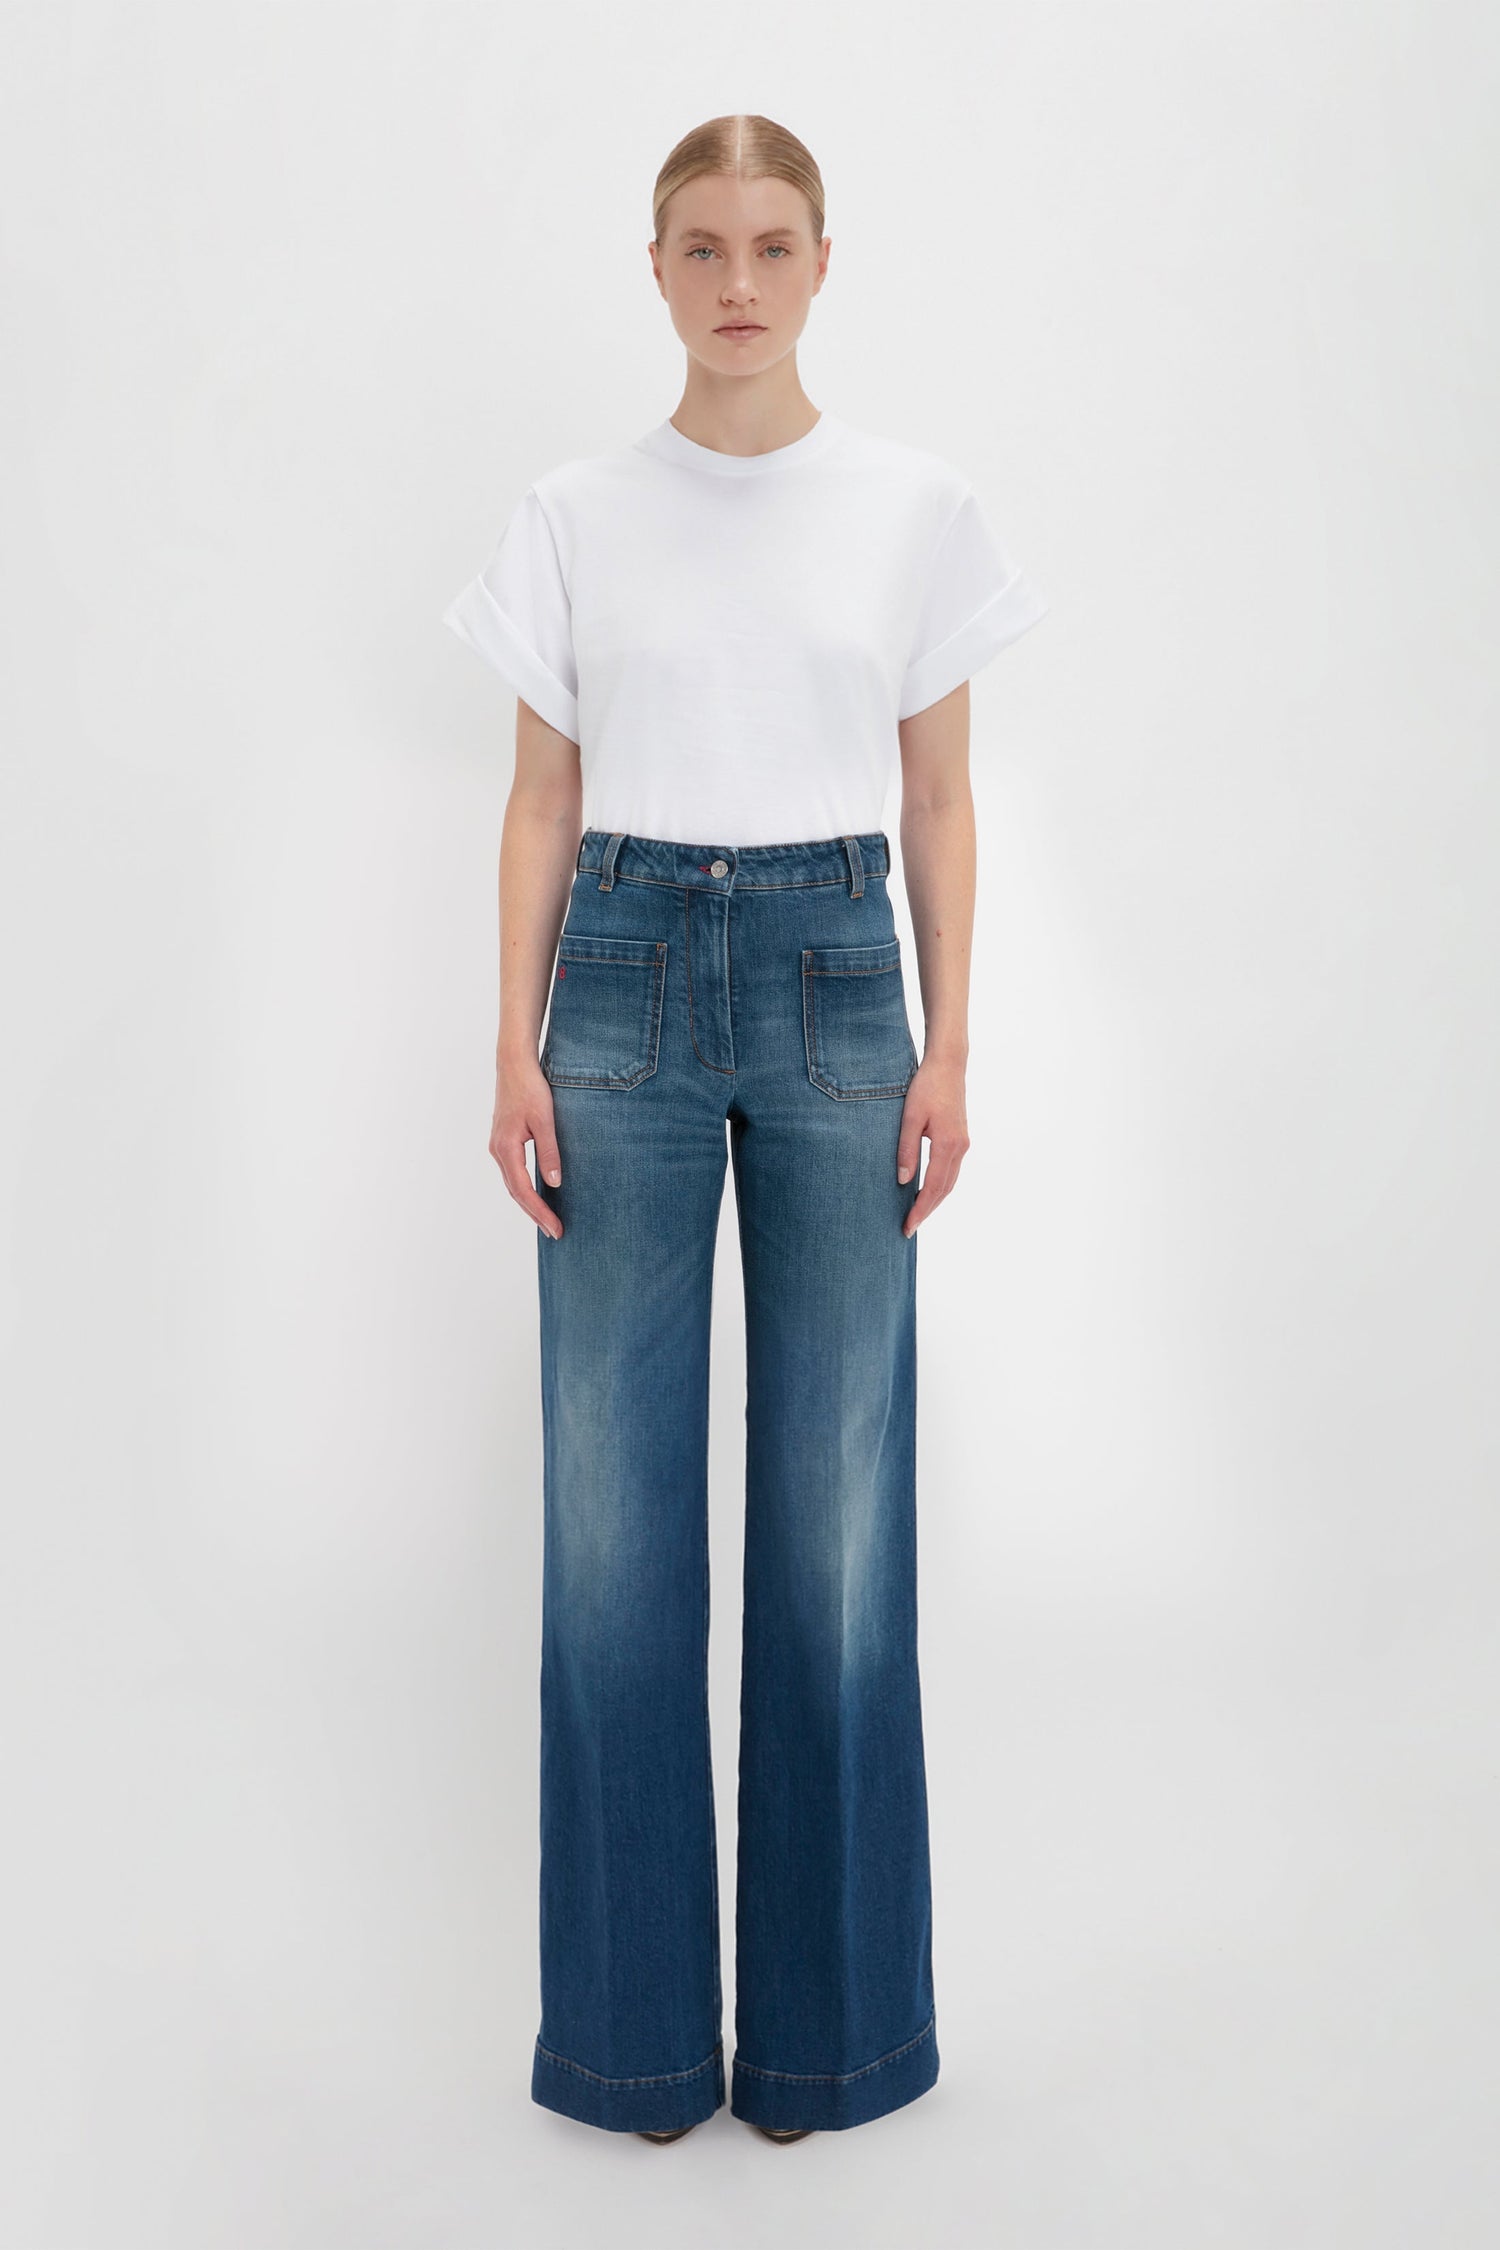 A woman standing against a white background wearing an oversized Asymmetric Relaxed Fit T-Shirt in White and blue wide-leg jeans by Victoria Beckham.